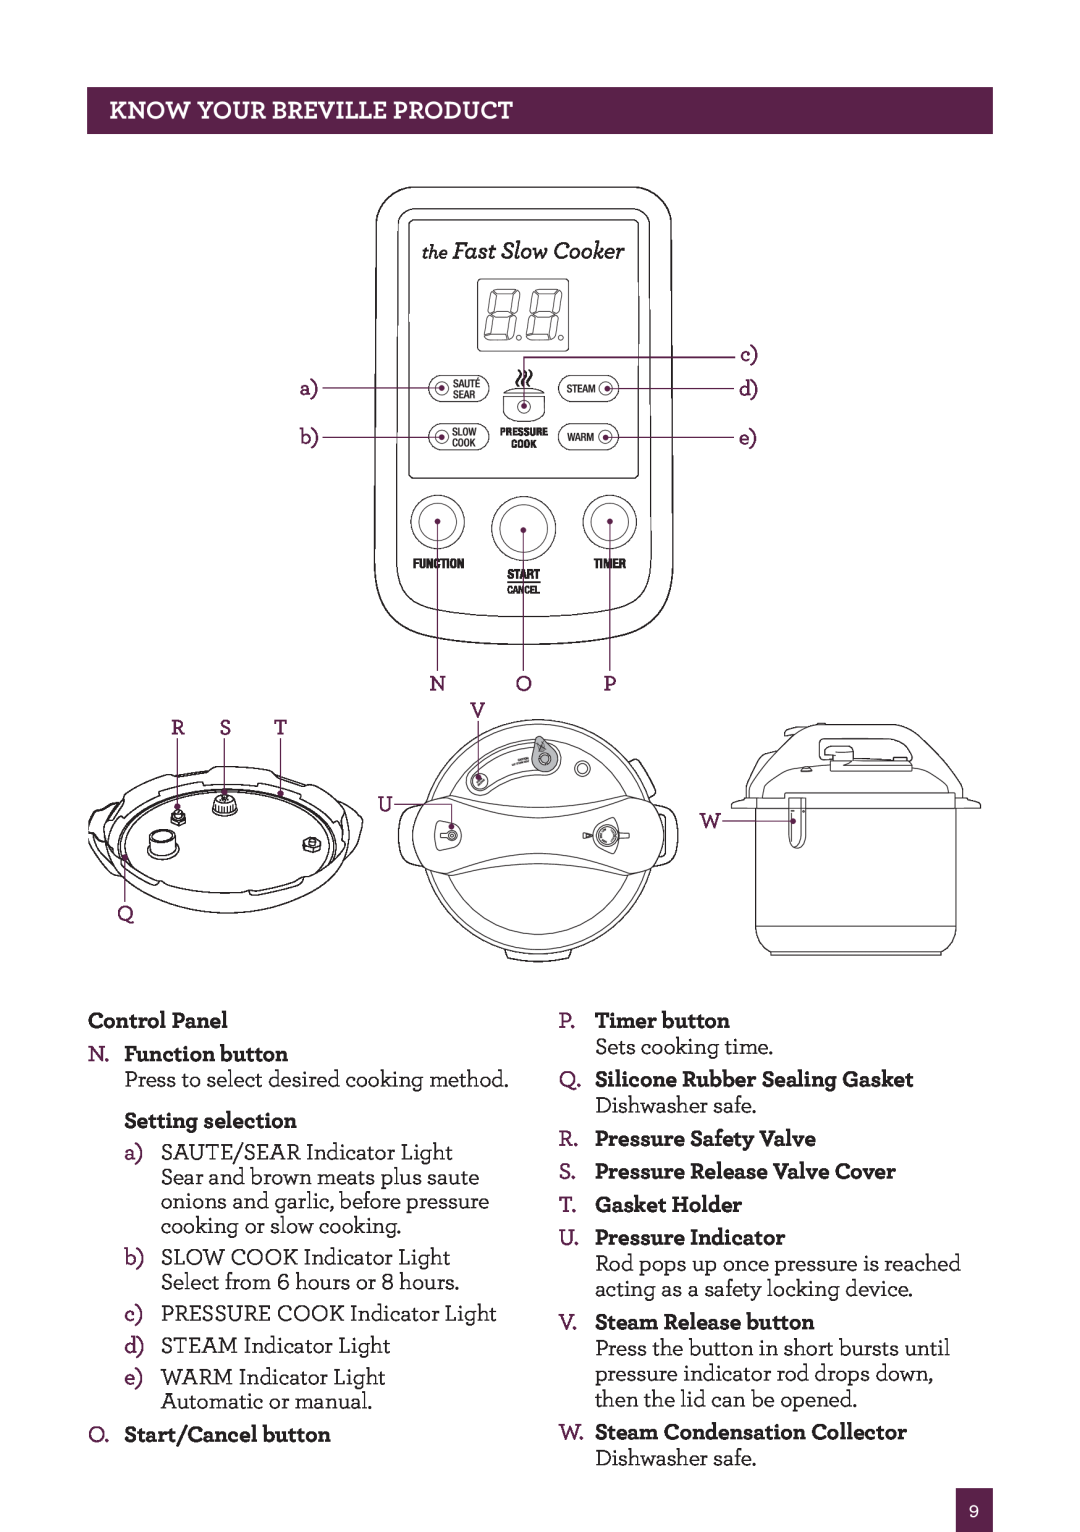 Breville BPR600XL Issue - A12 manual Know Your Breville Product, Control Panel N. Function button 